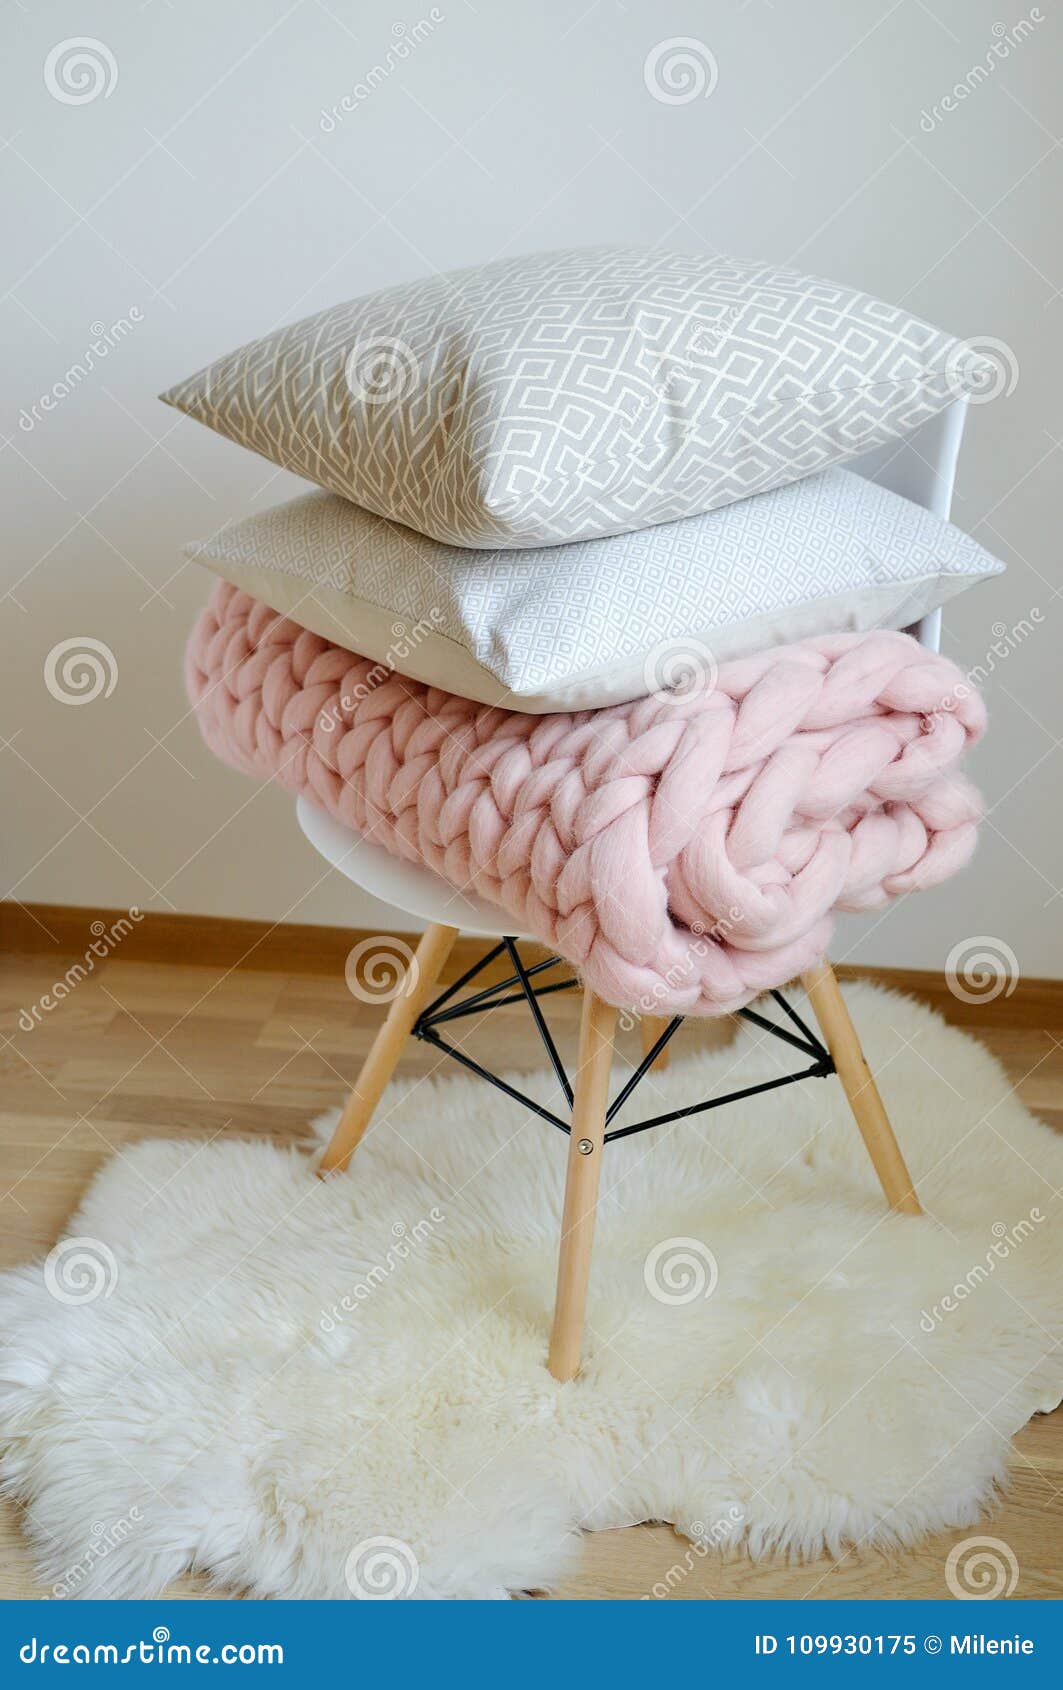 Giant Pink Blanket Woolen Knitted On White Wooden Stool Chair